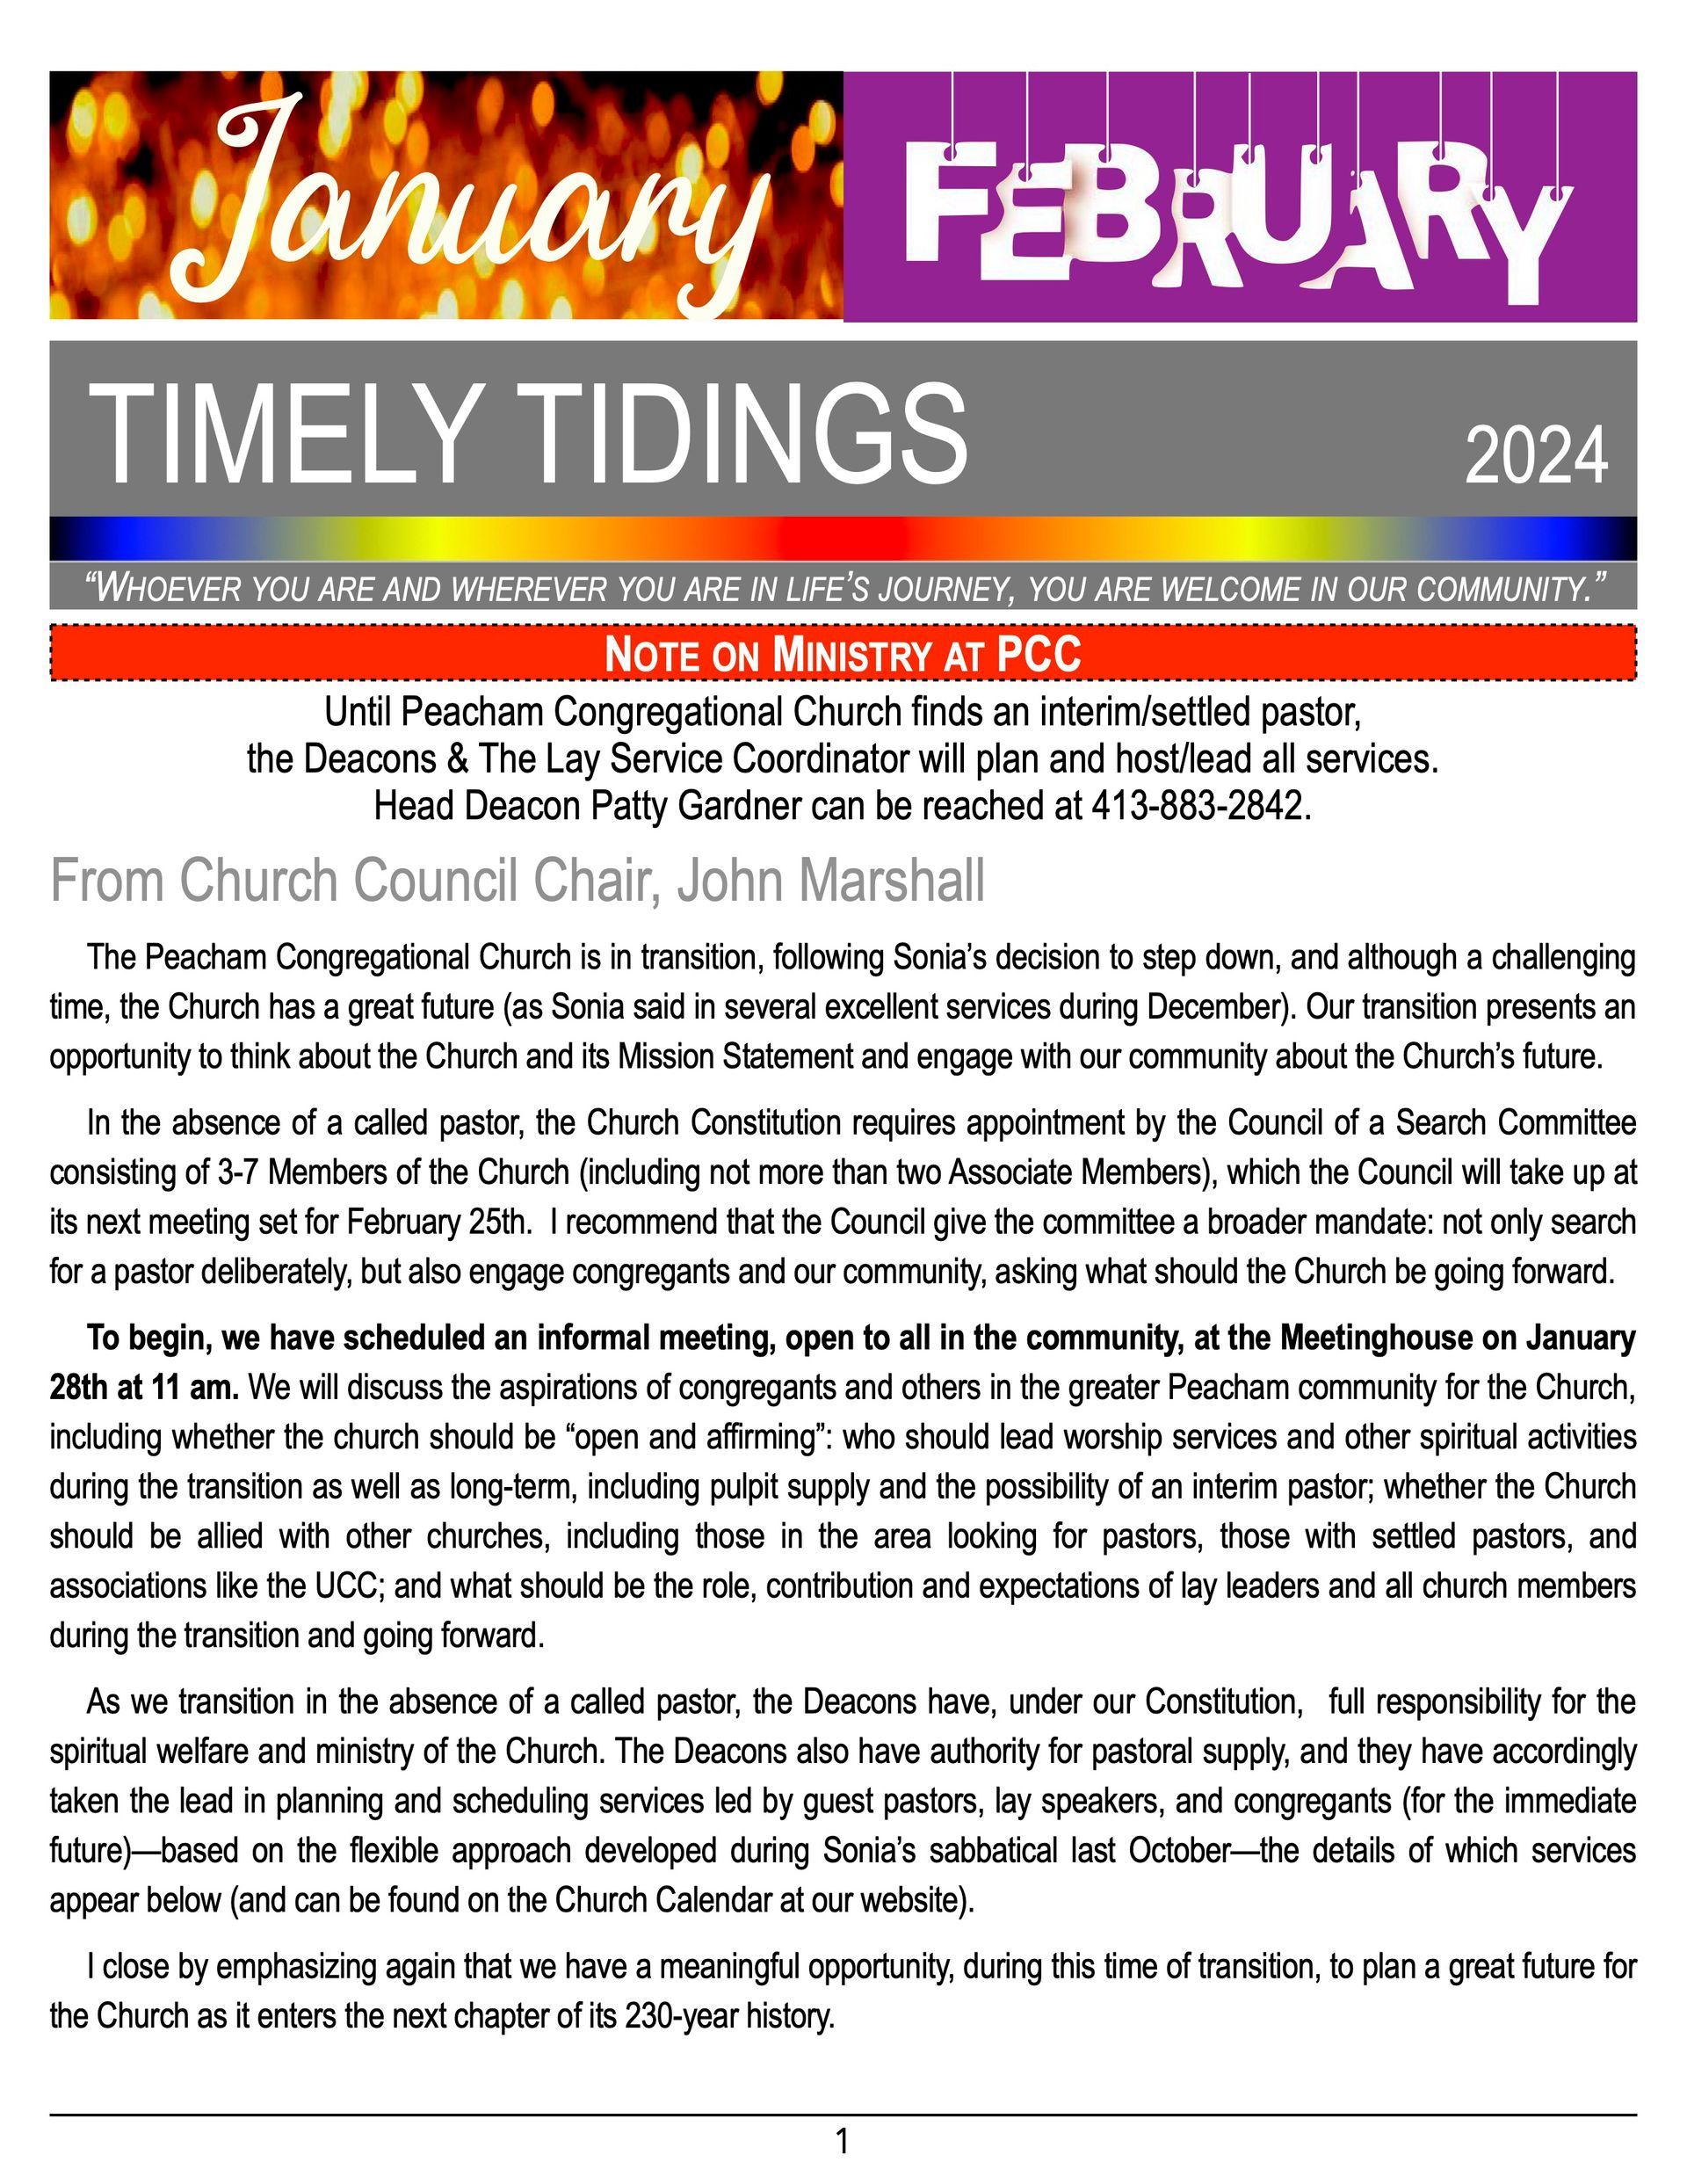 The Timely Tidings Newsletter